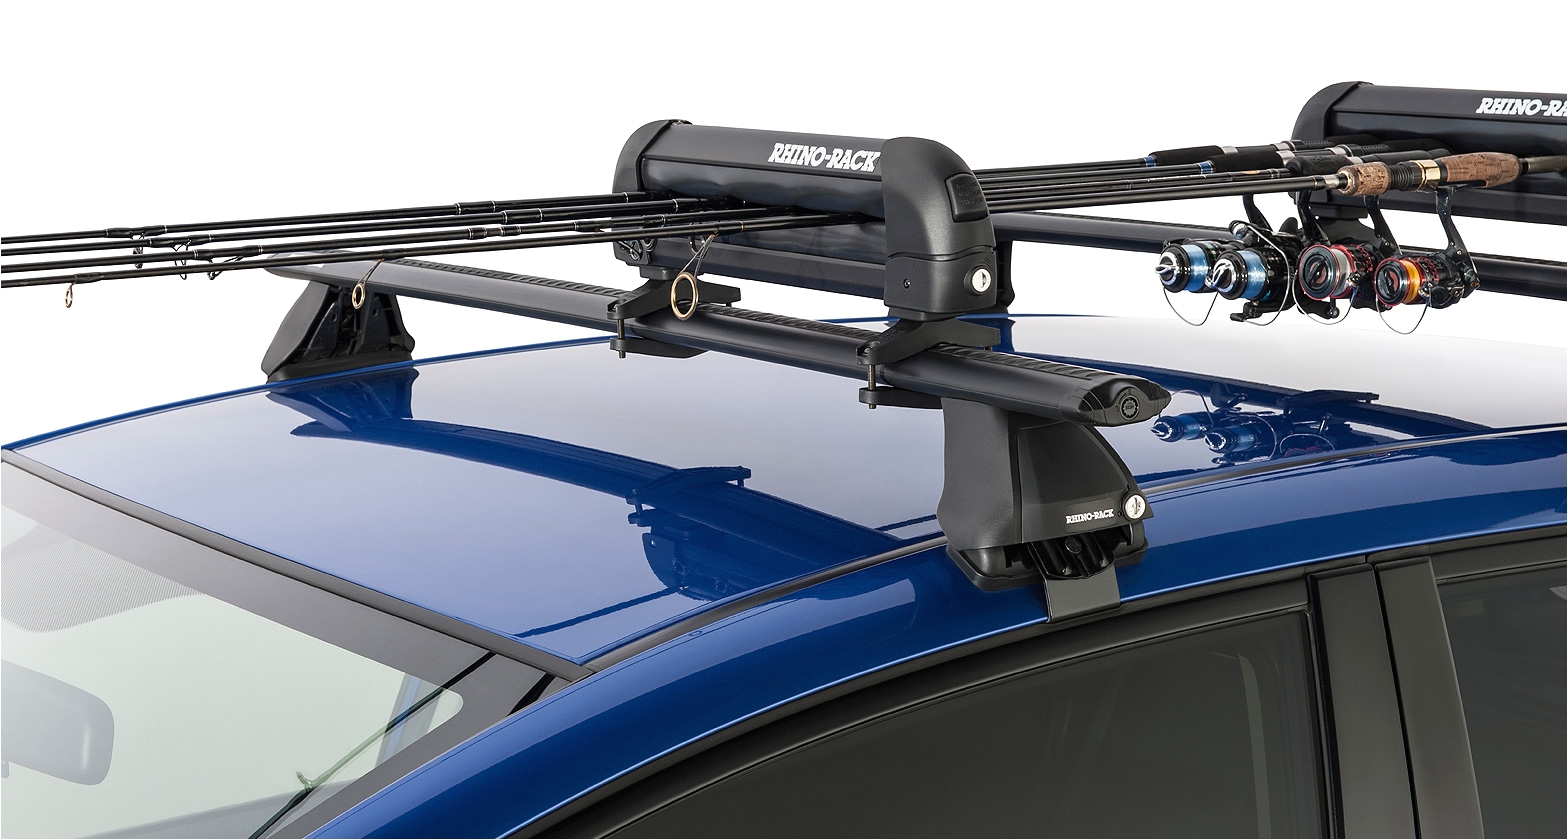 ski carrier and fishing rod holder holds 3 skis or 2